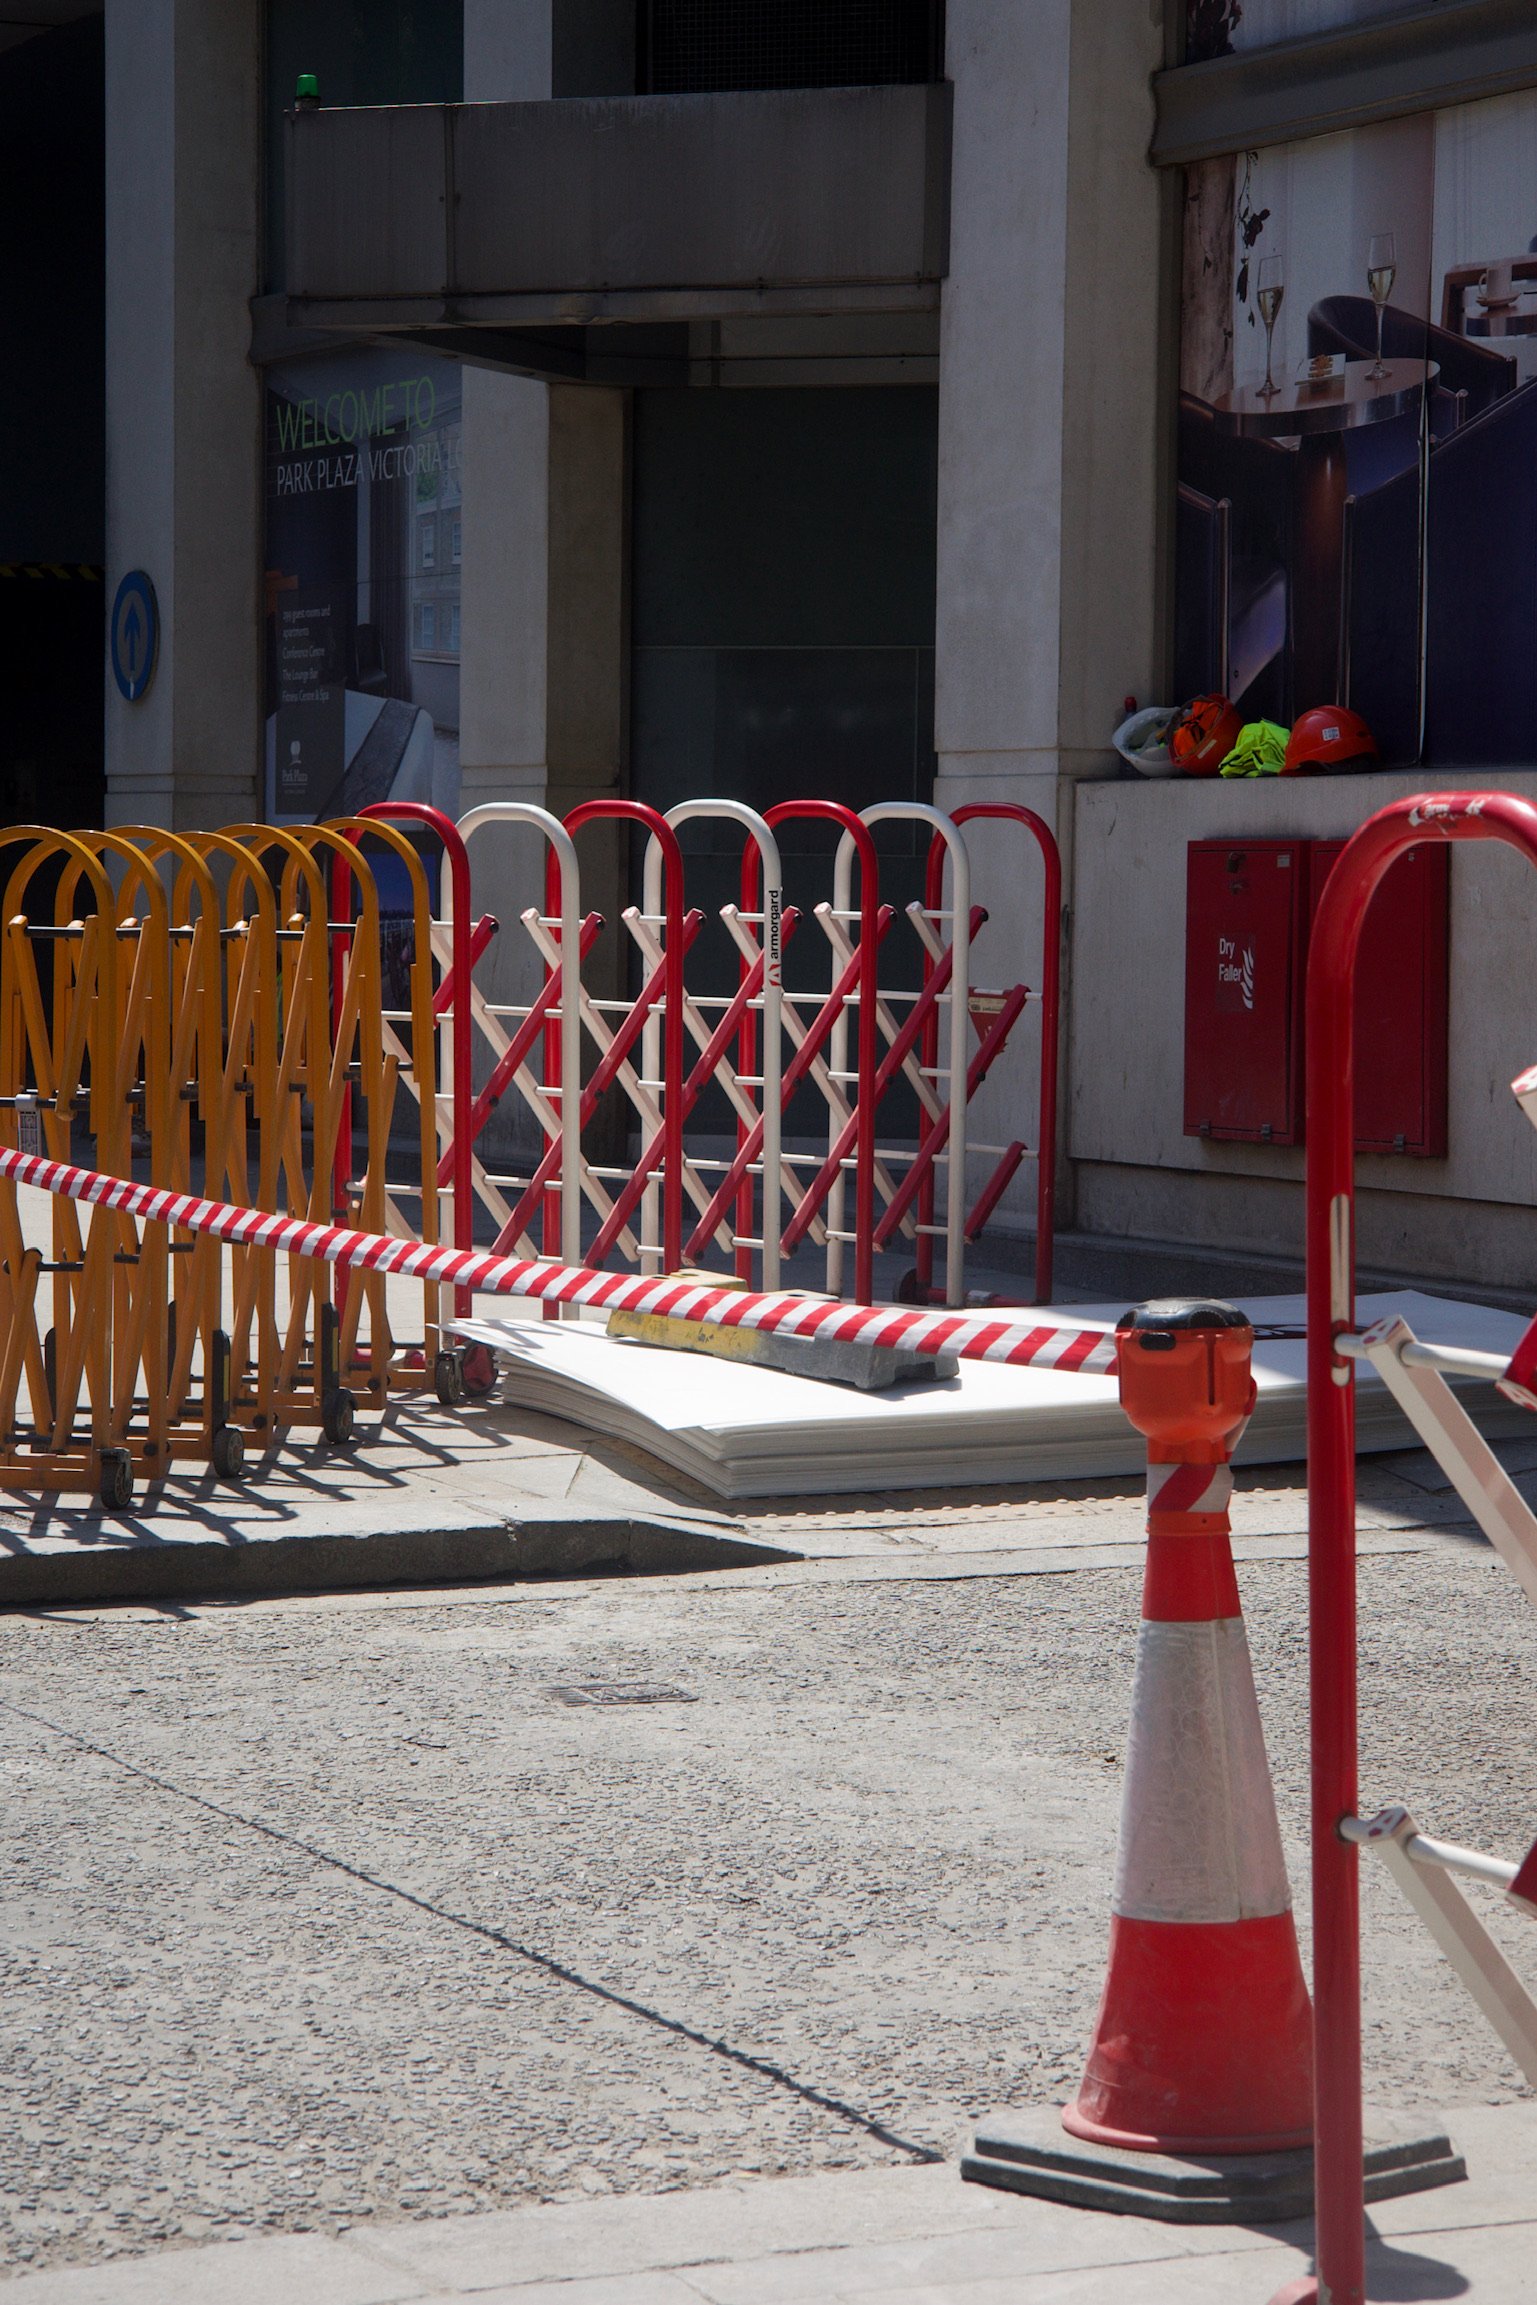 construction site with yellow and red fences and traffic cone.